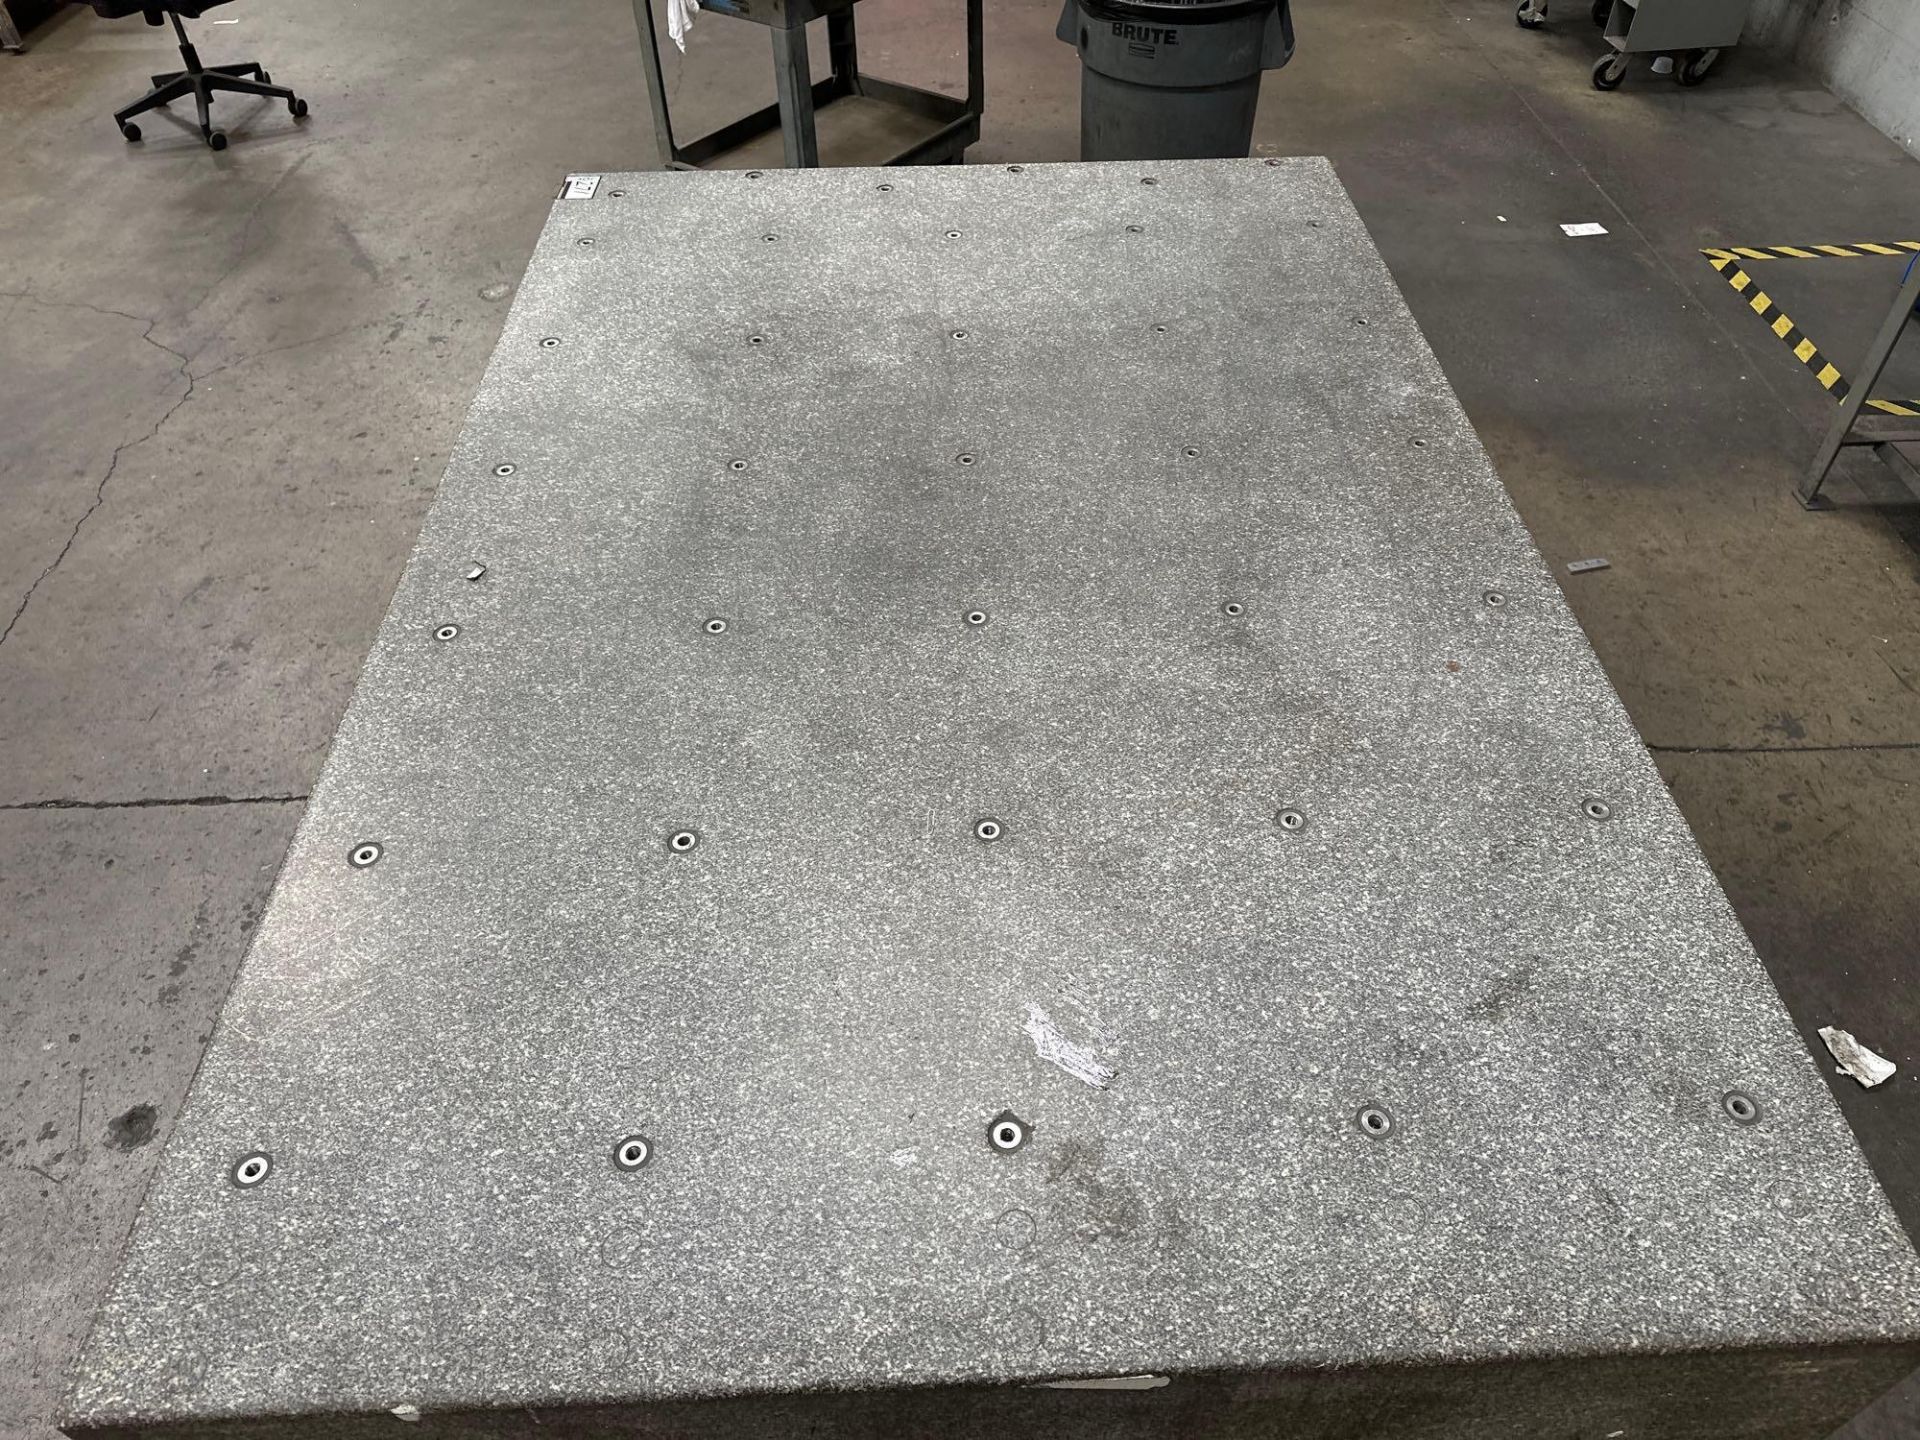 18” x 59” x 90” Granite Surface Plate w/ Steel Stand - Image 6 of 6